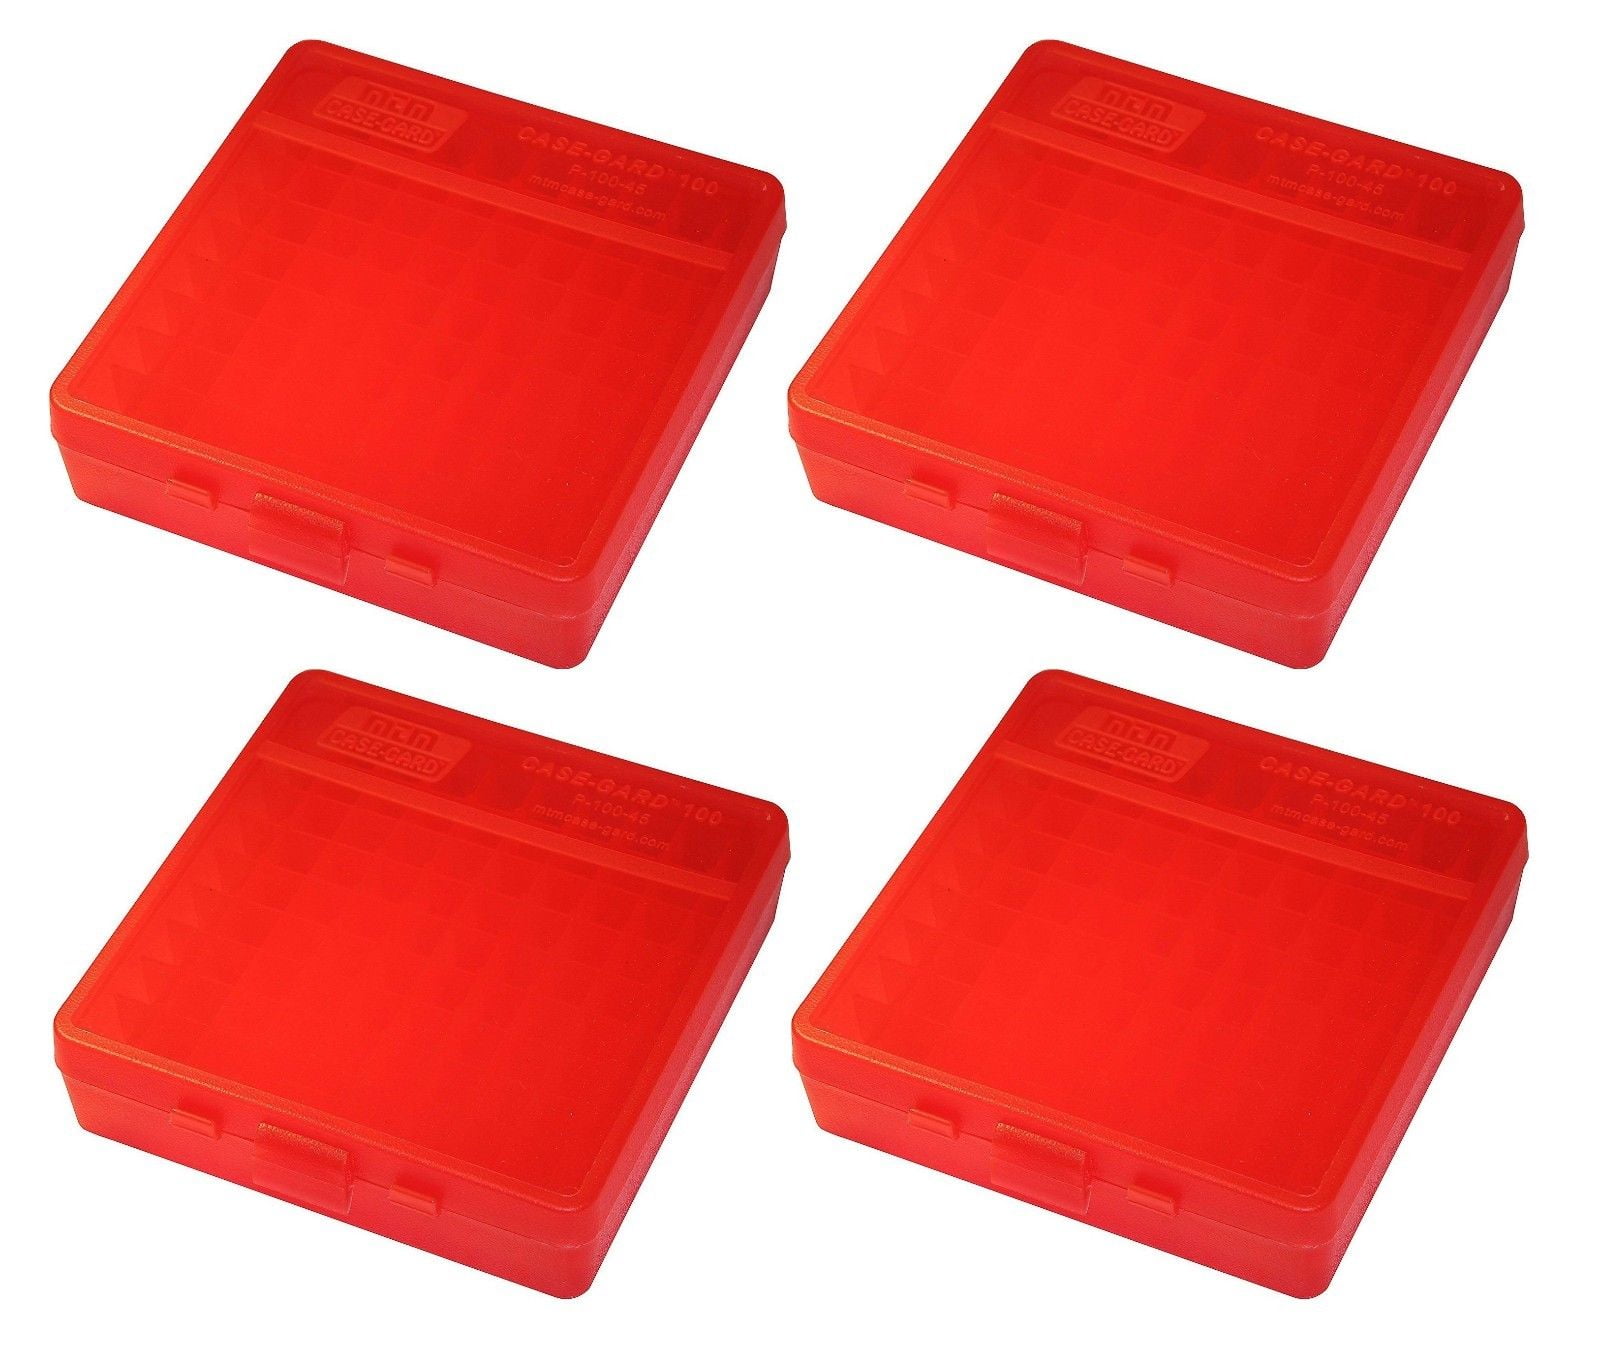 45 ACP CLEAR COLOR 10 10 MM  100 ROUND PLASTIC AMMO BOXES 40 